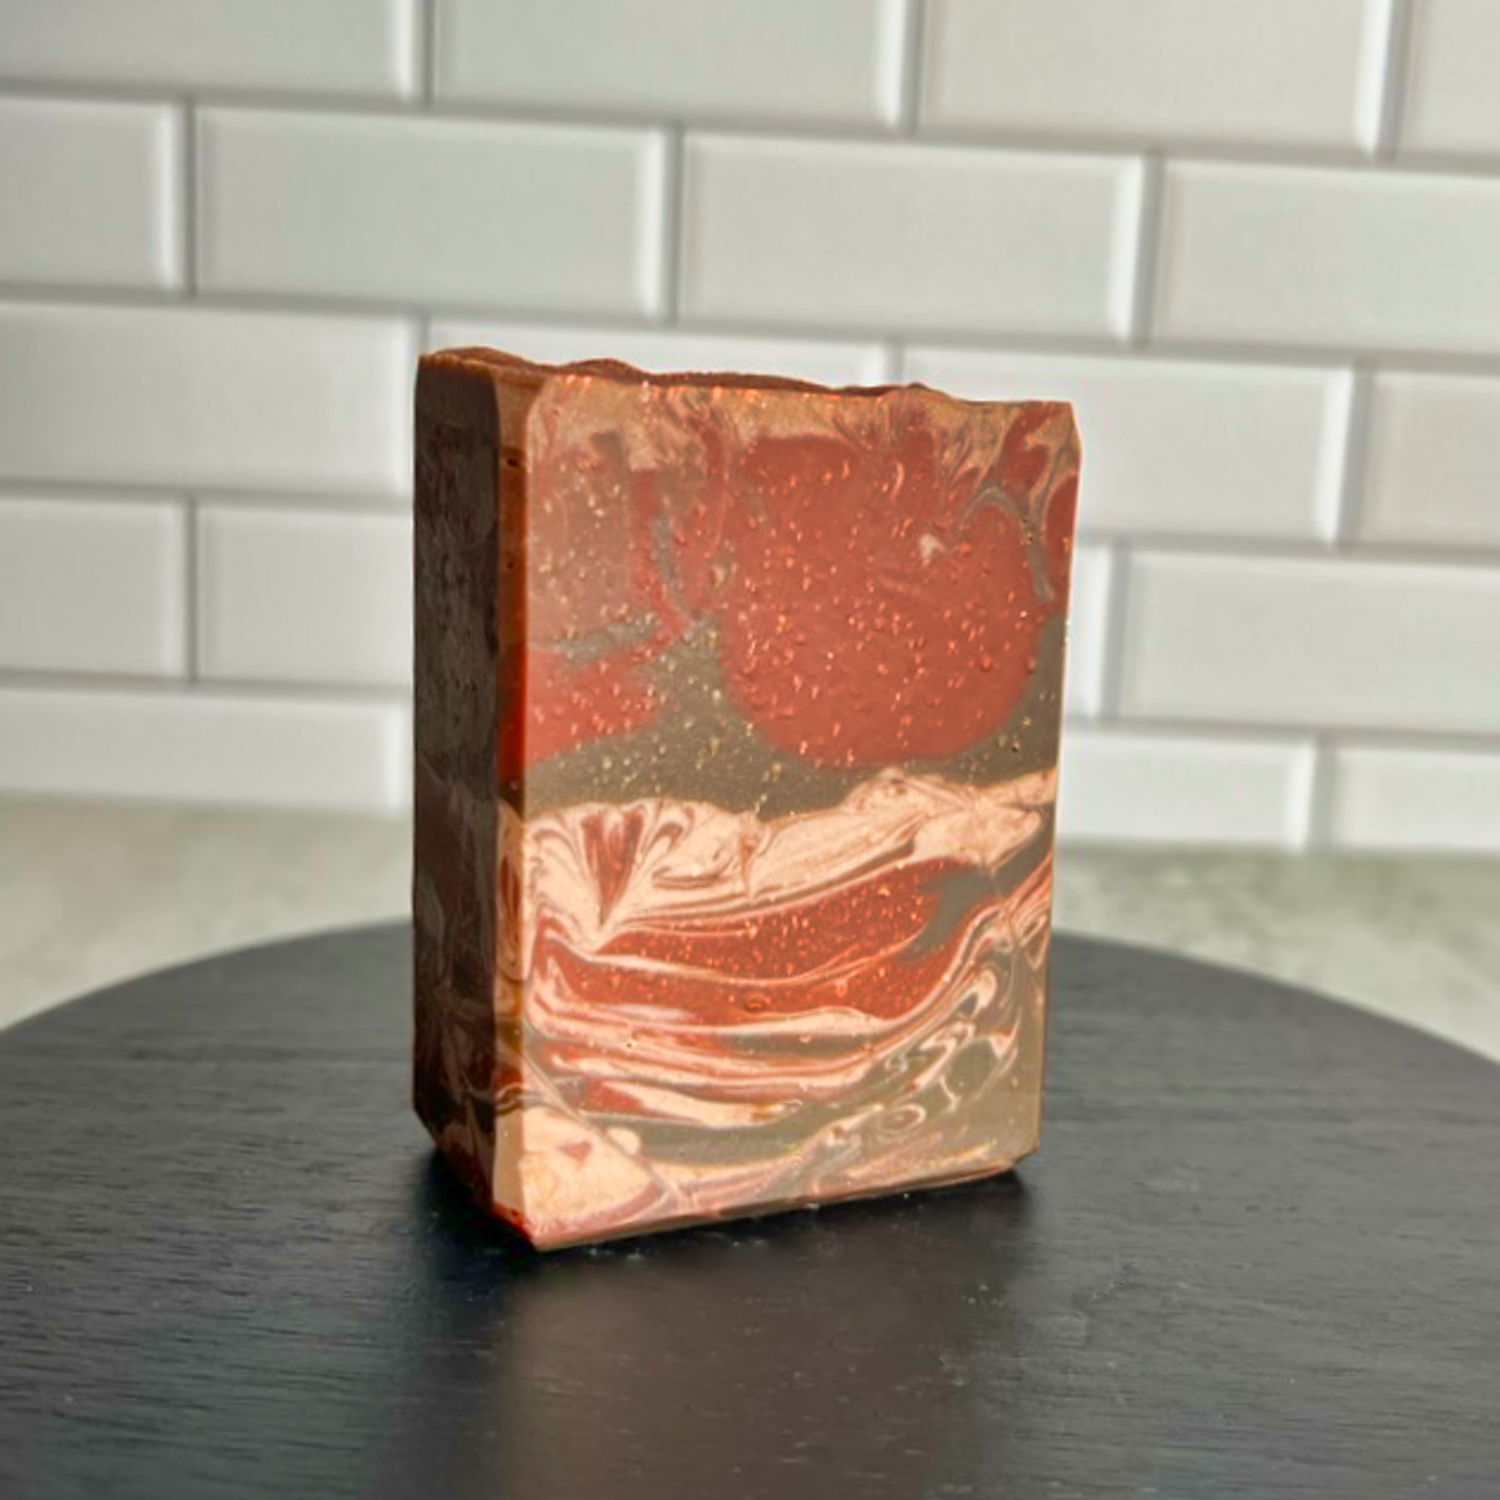 Asian Sandalwood Artisan Soap - Smell This Candle - Bar Soap